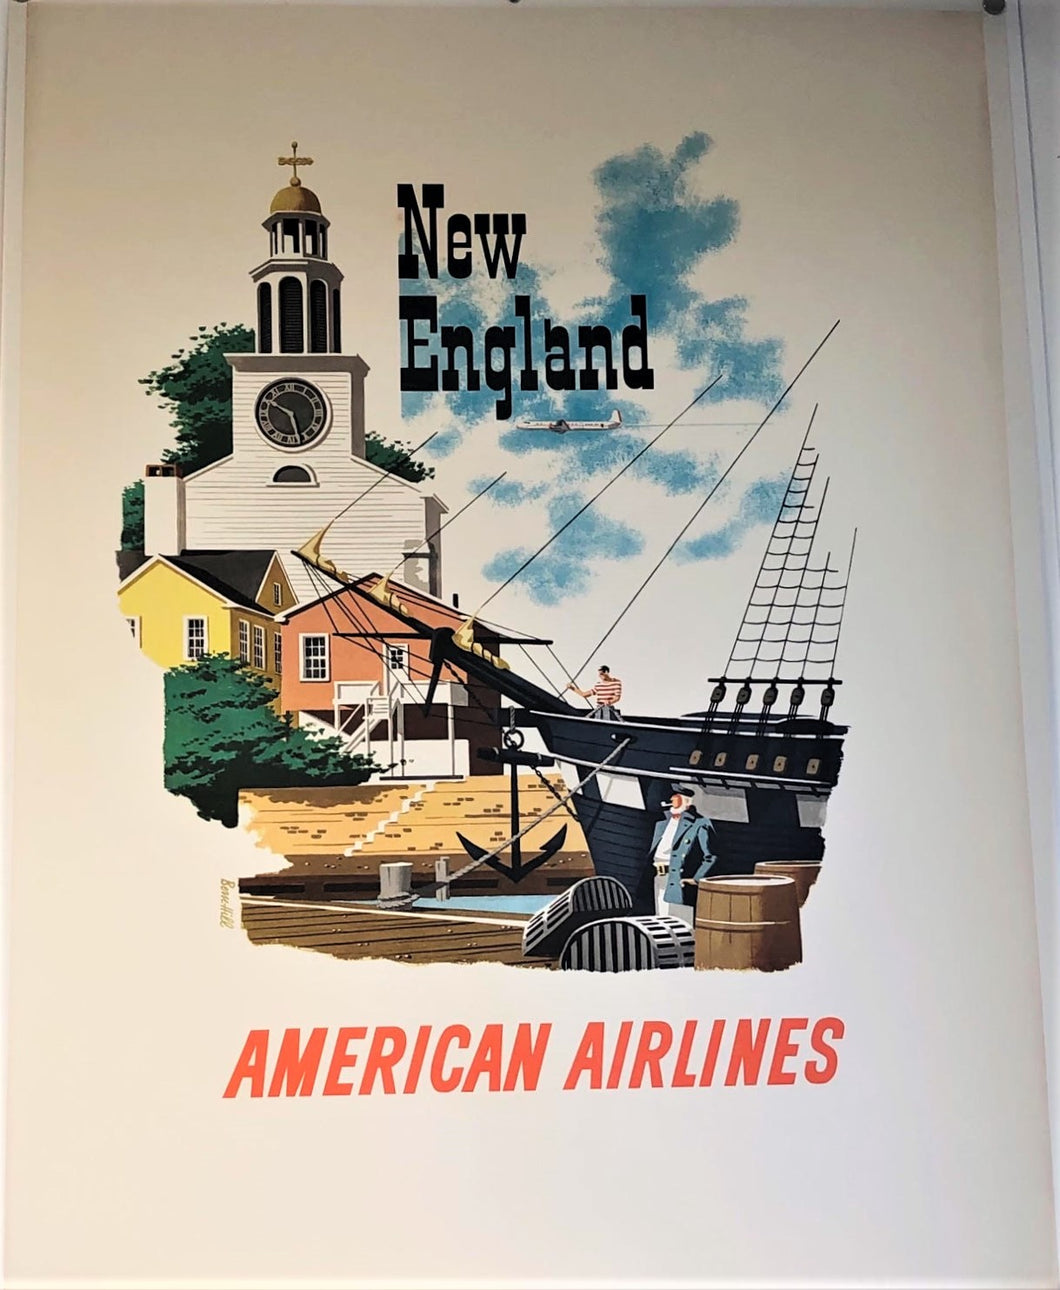 New England - American Airlines